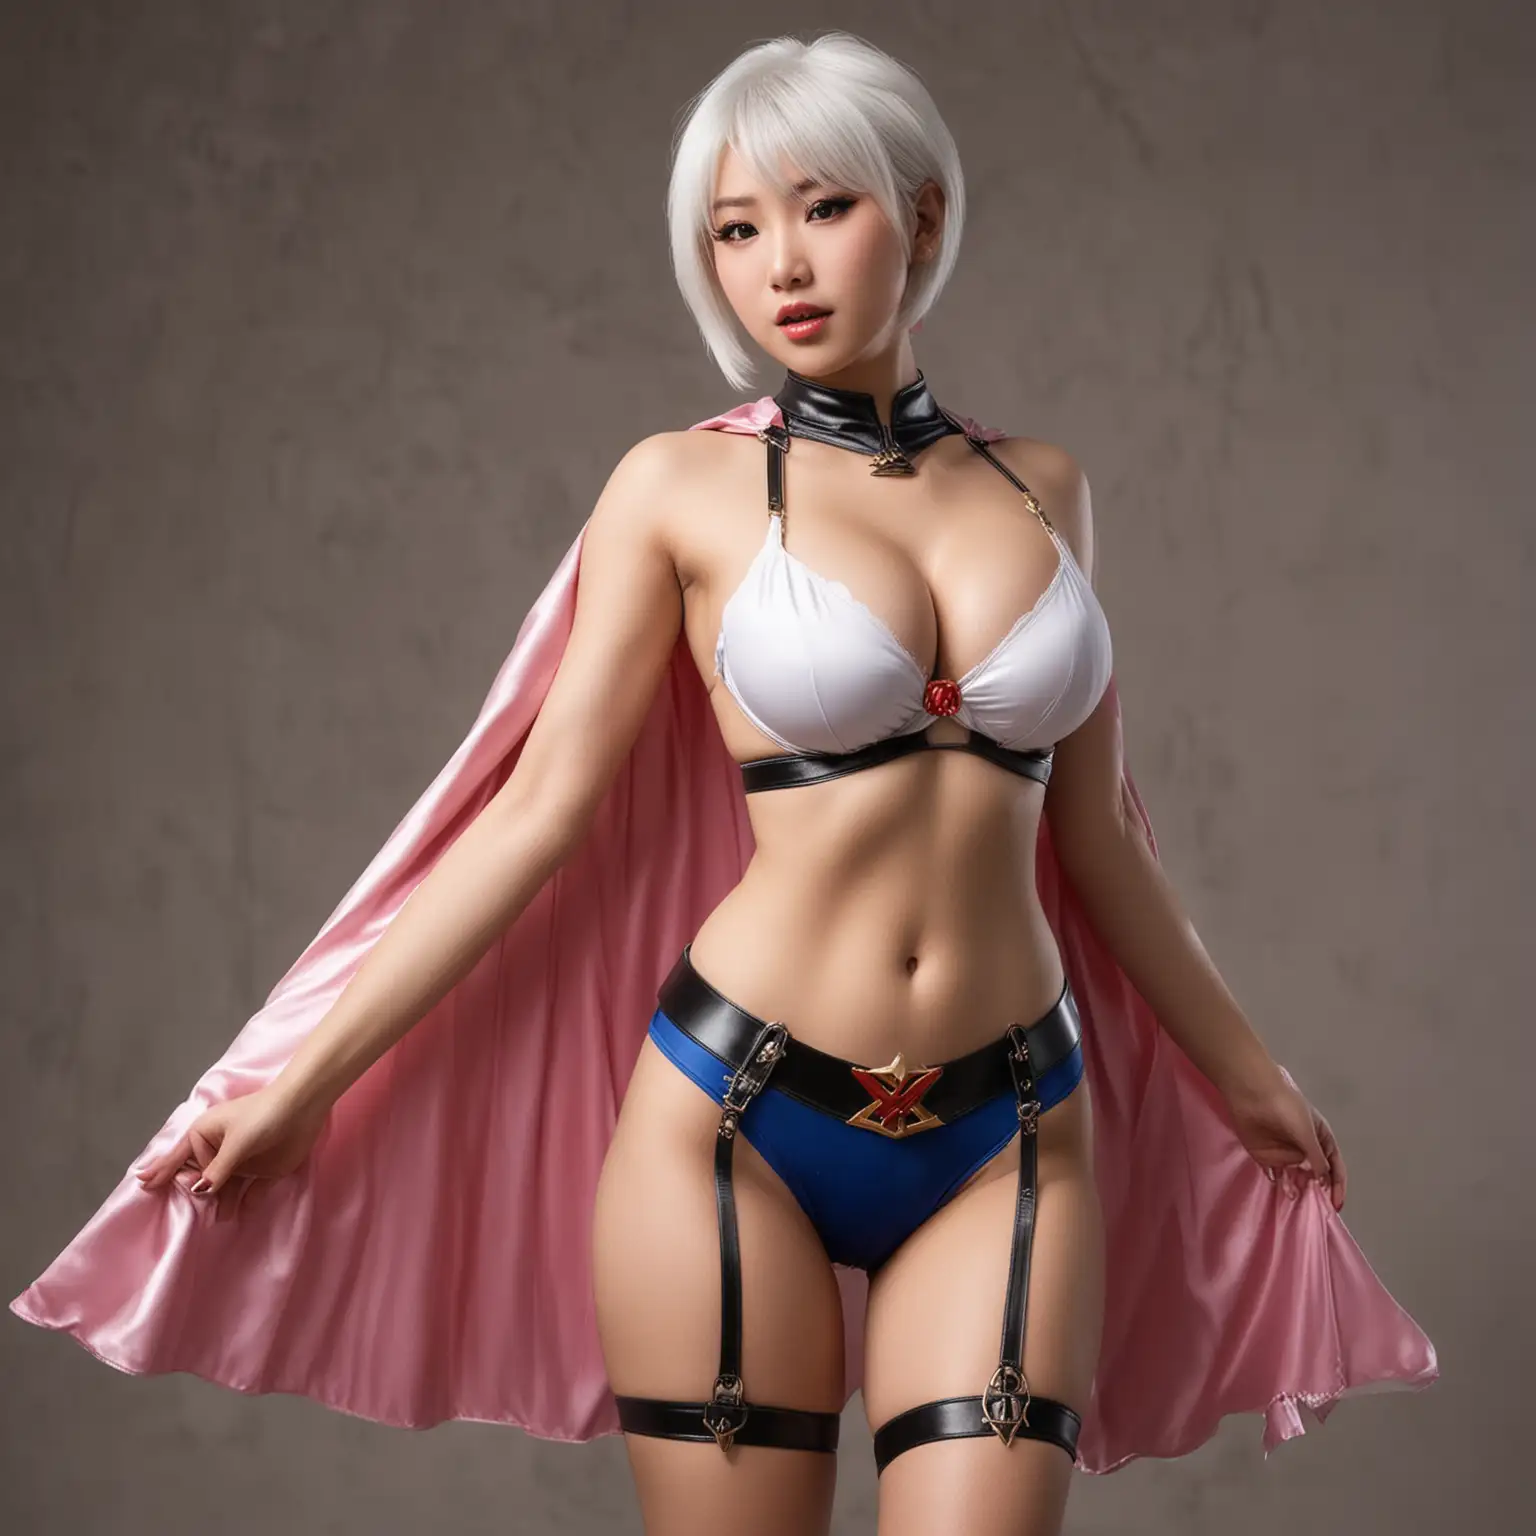 Sultry Chinese Supergirl Dominatrix in White Cape and Lingerie